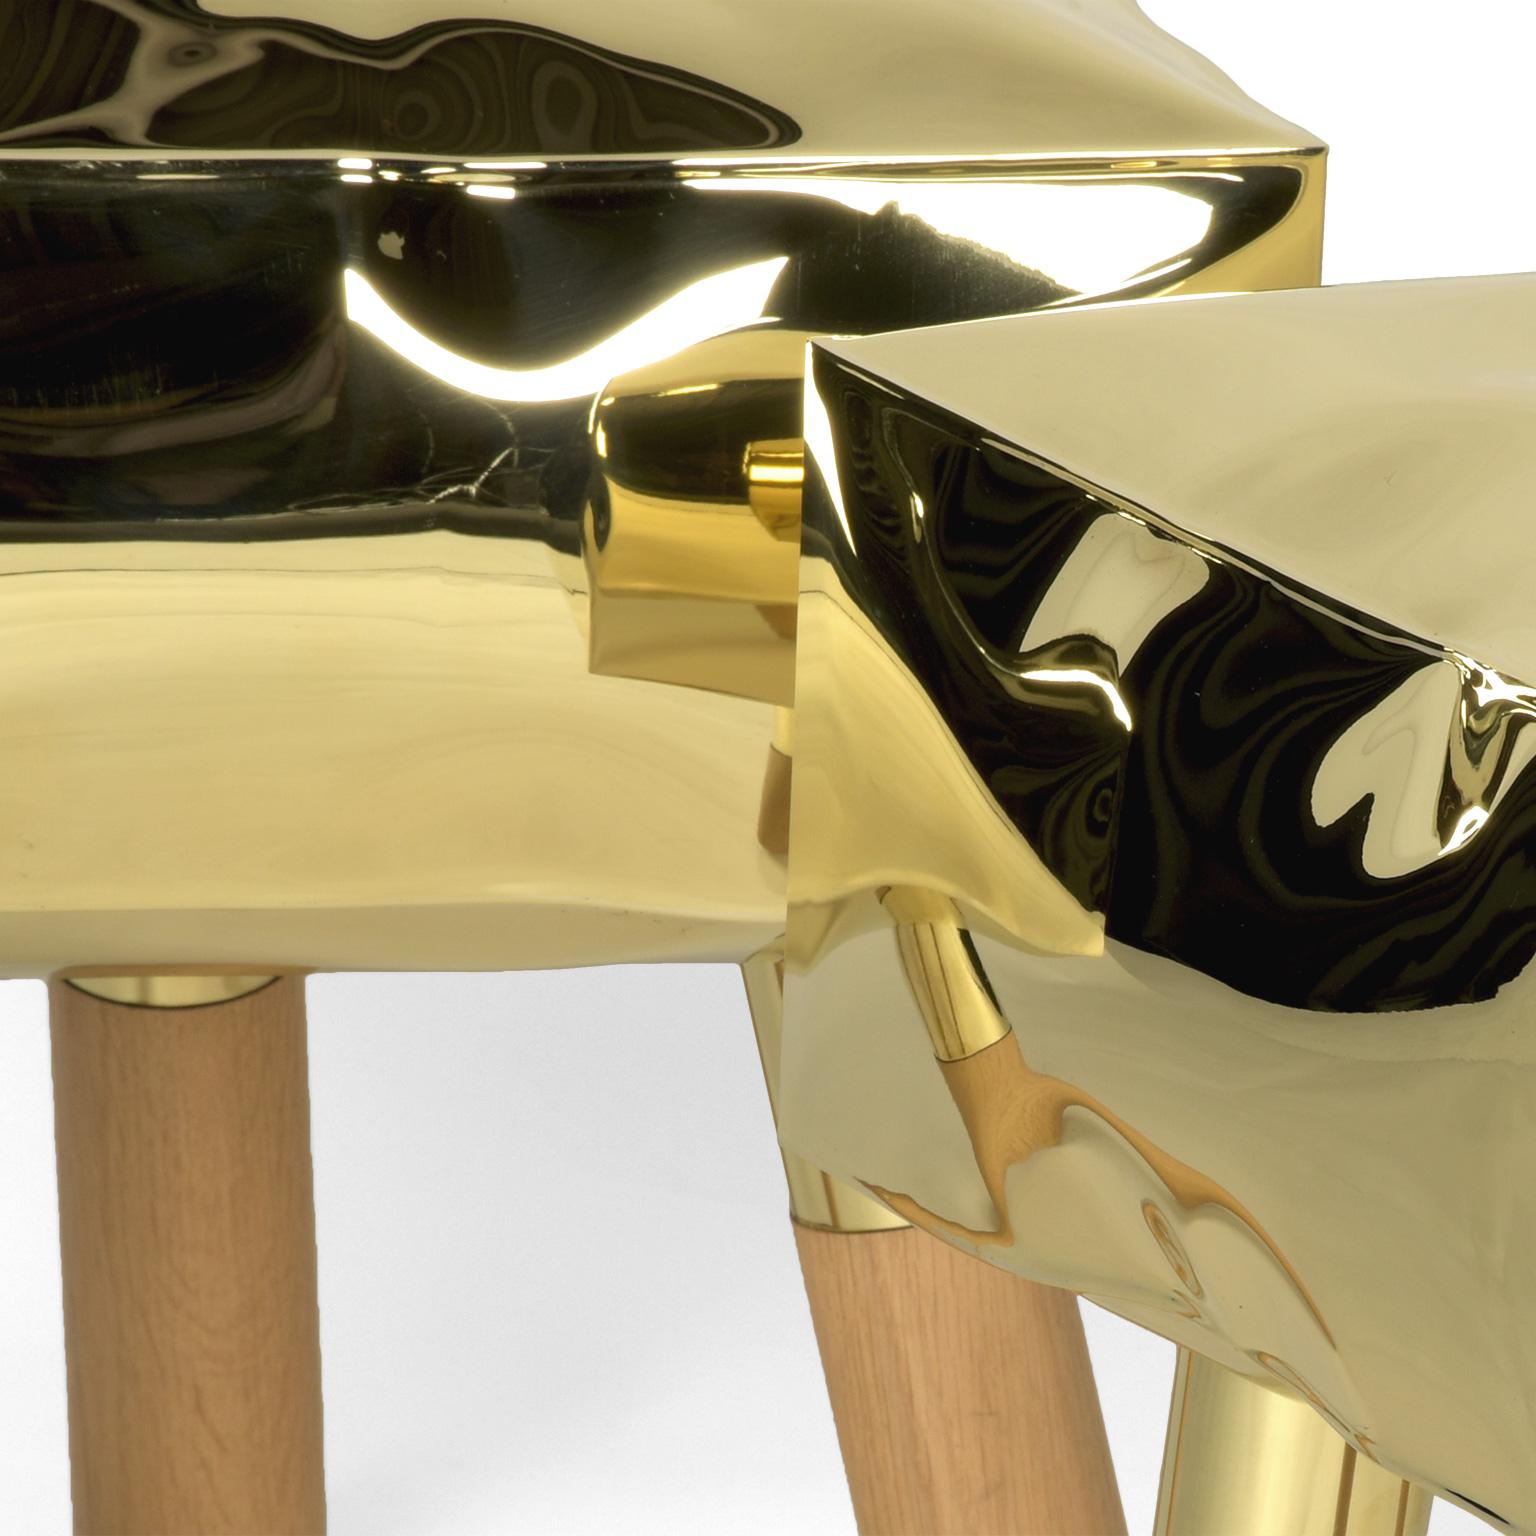 Contemporary Limited Edition Wood Brass Stool, Icenine V1 by Edizione Limitata 4